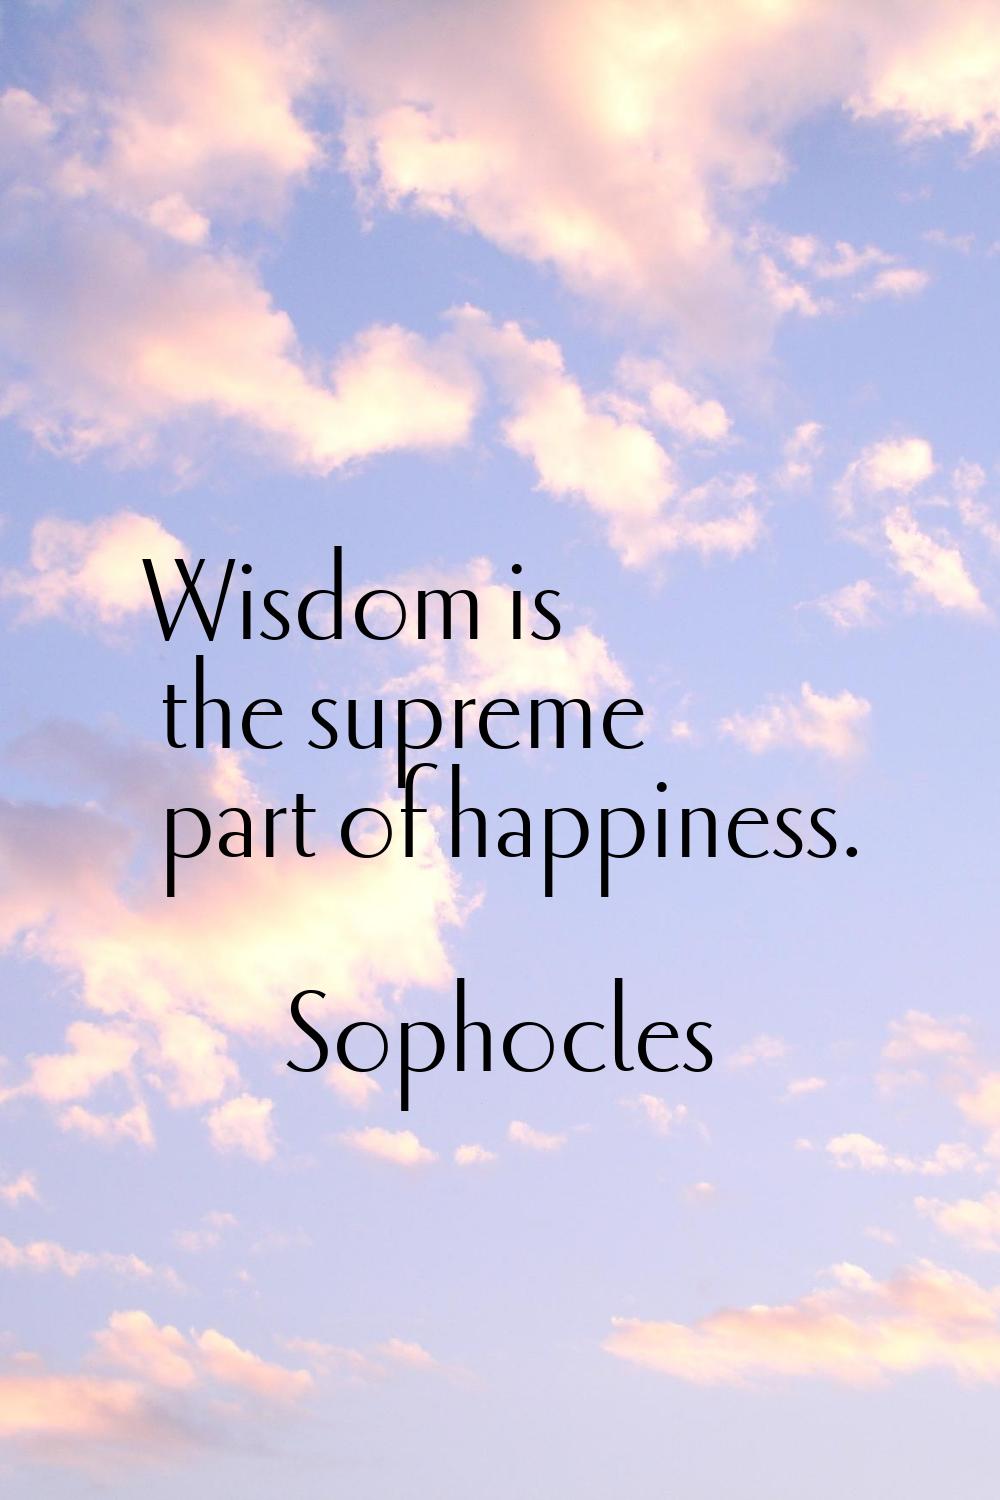 Wisdom is the supreme part of happiness.